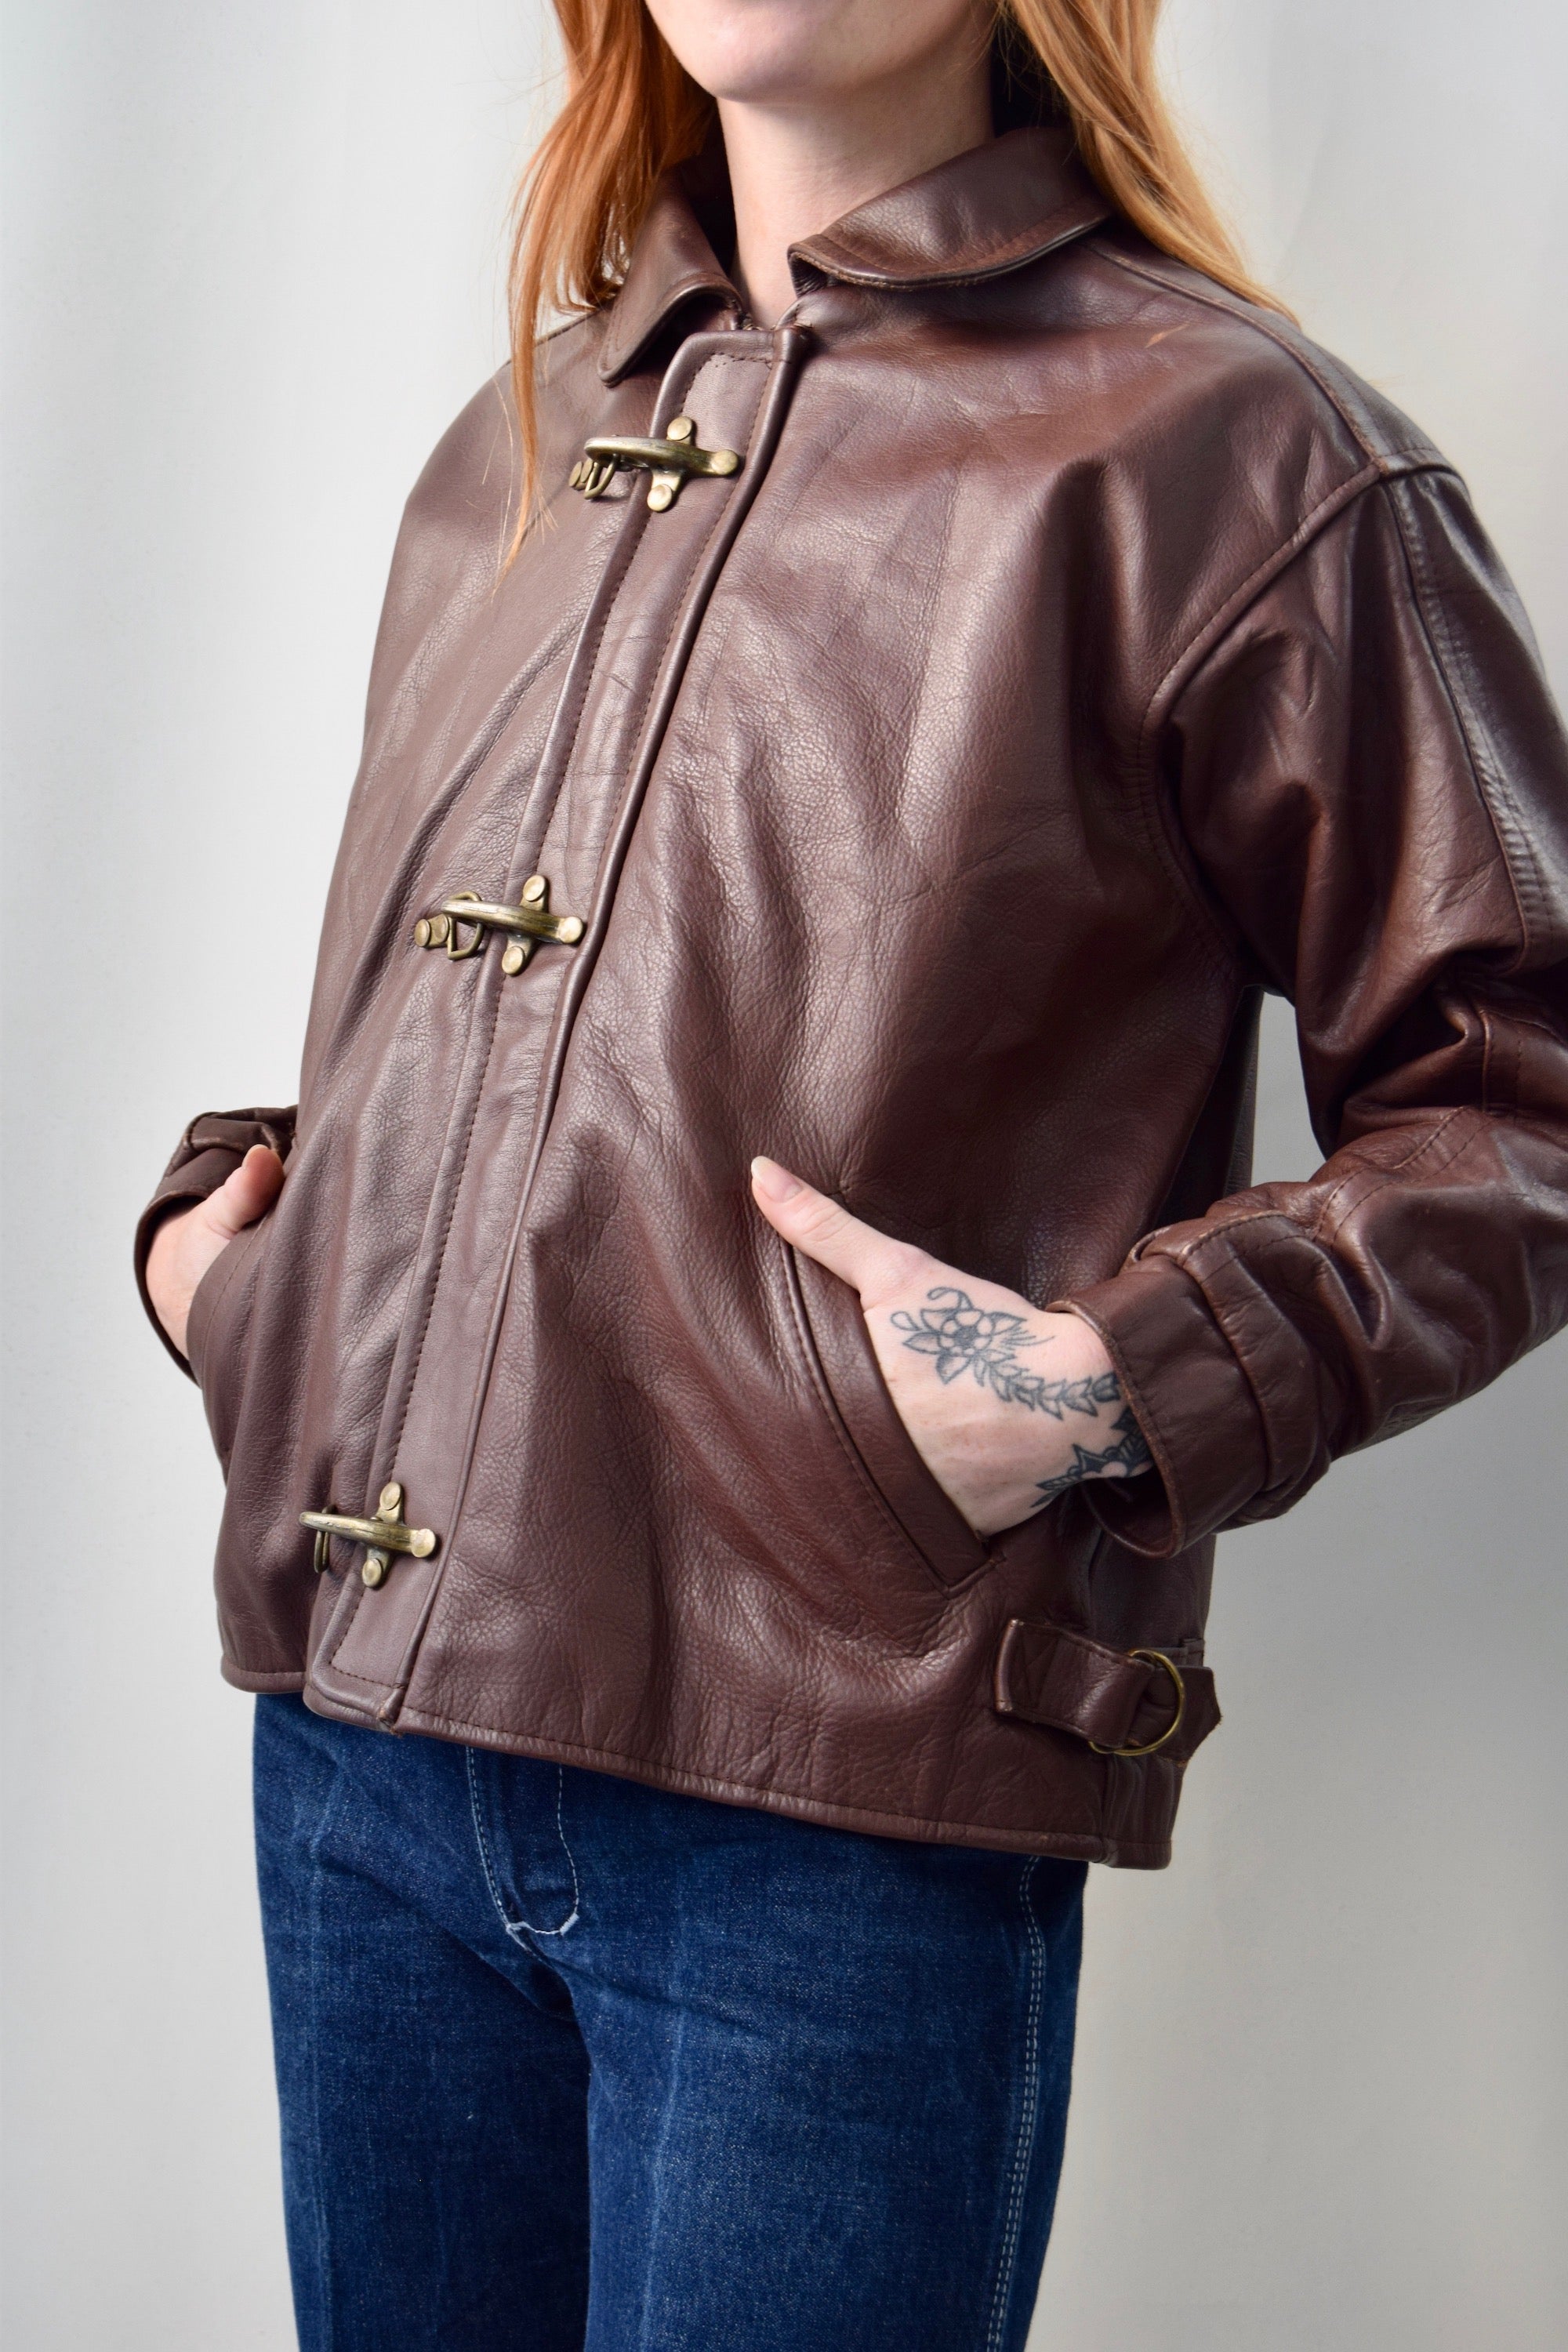 40's Inspired Leather Jacket